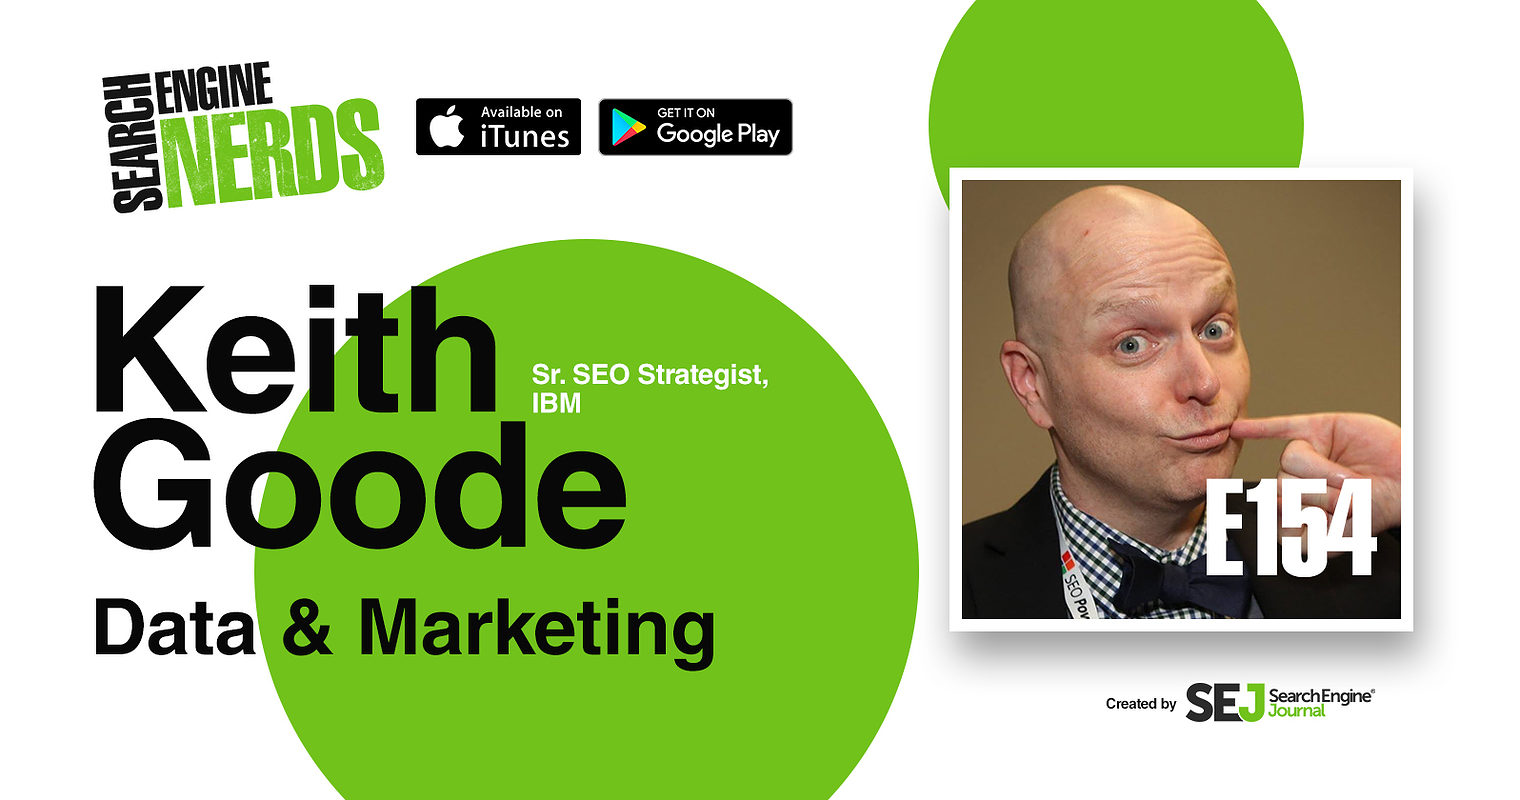 Keith Goode on How Data Plays Into Marketing [PODCAST]